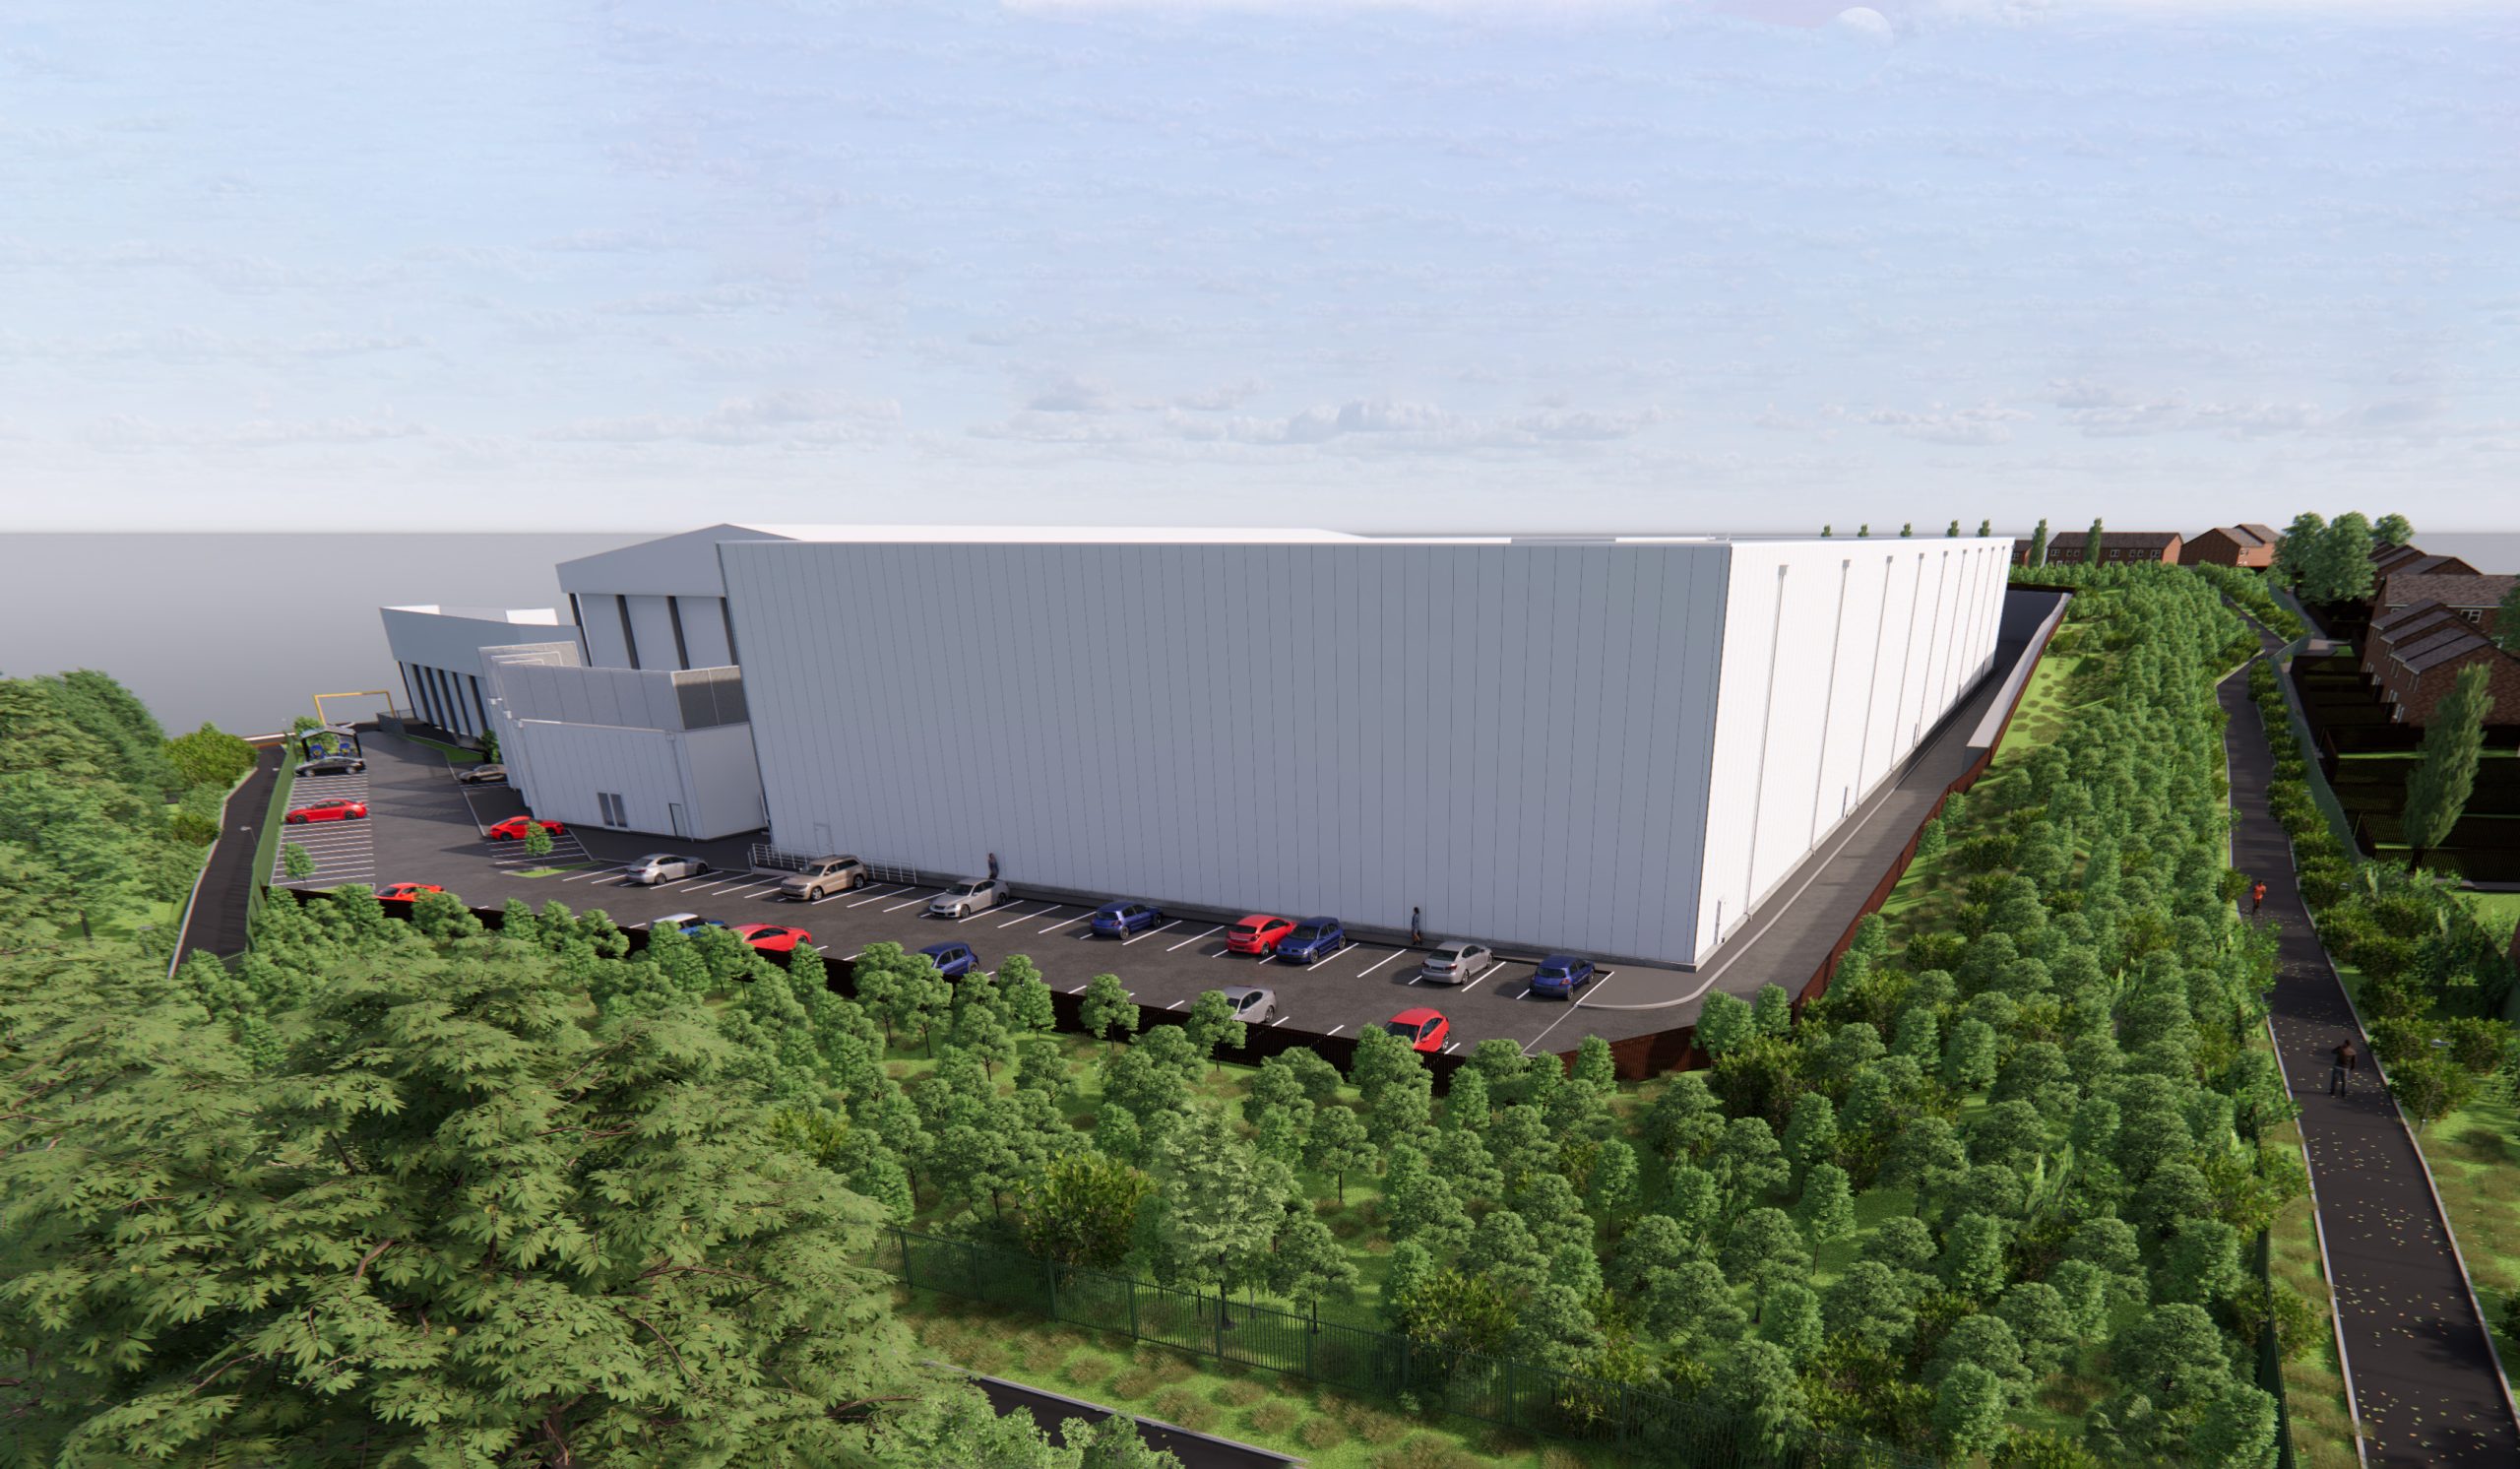 Magnavale Chesterfield Expands Cold Storage Facility Adding 23,000 Pallet Positions